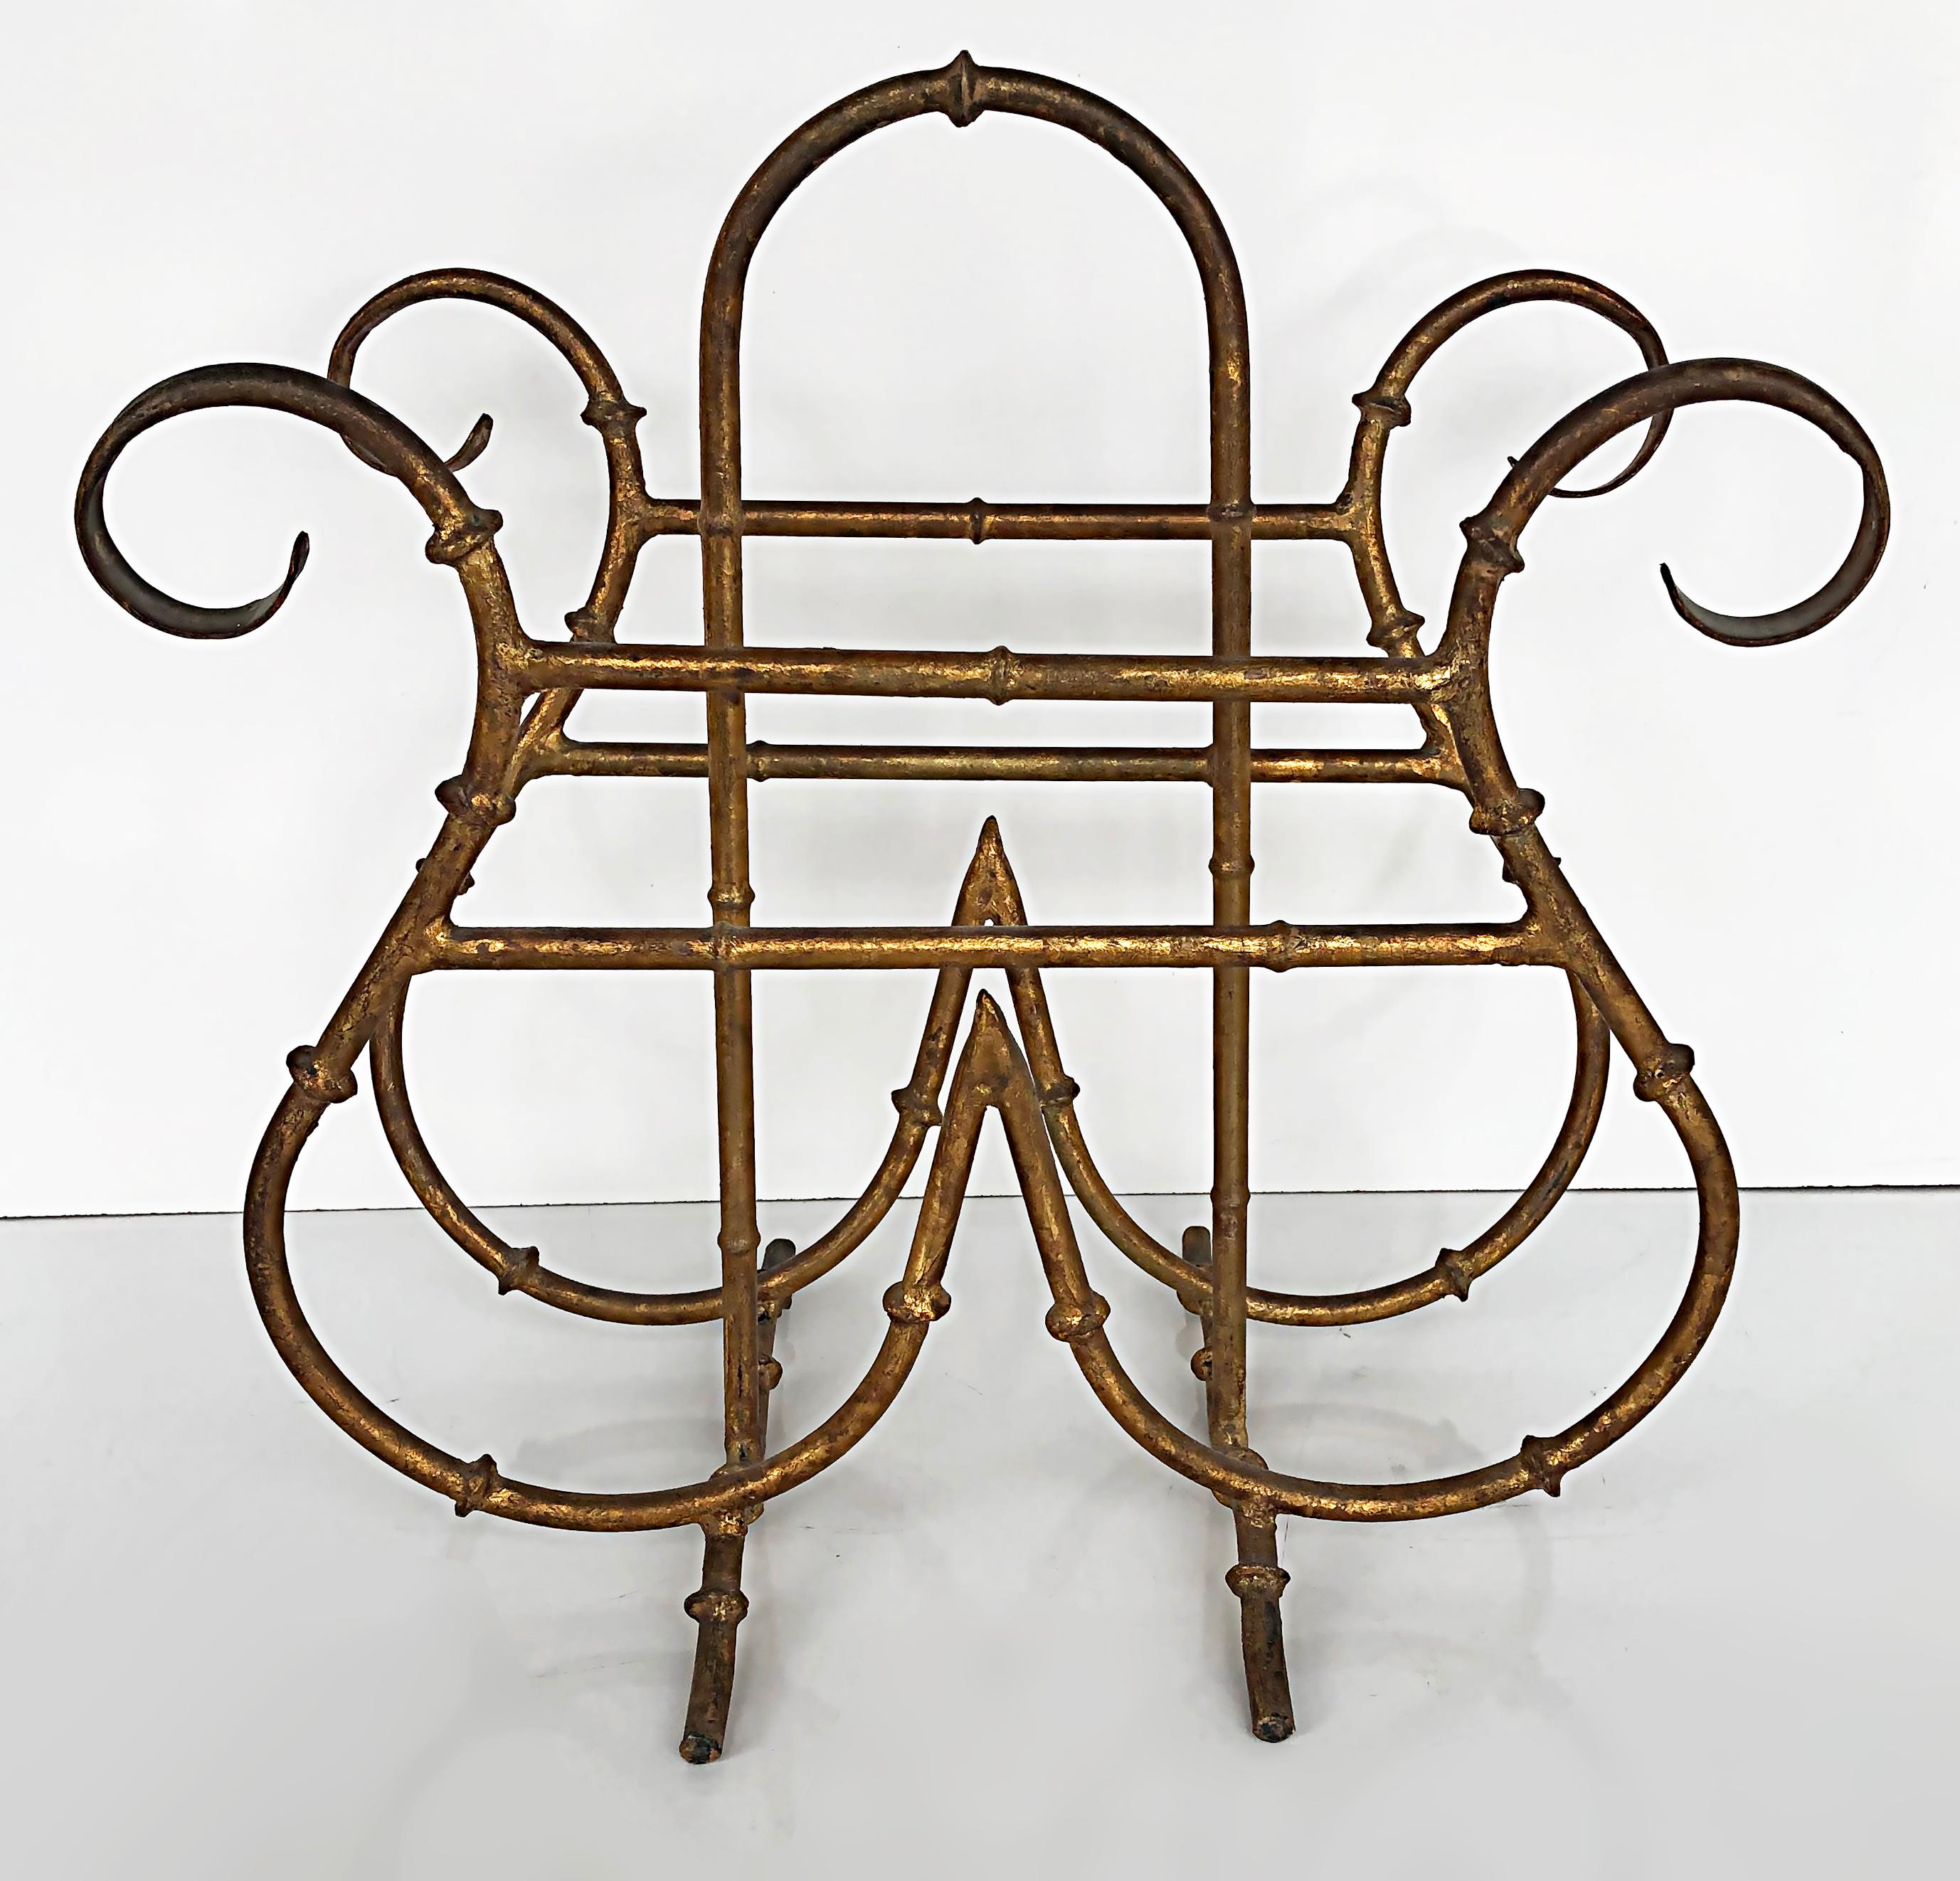 Gilt wrought iron magazine rack newspaper stand holder

Offered for sale is a 20th-century gilt wrought iron magazine rack with a lyrical design. The rack or stand has lovely curves and will integrate nicely in many design settings. The rack had a